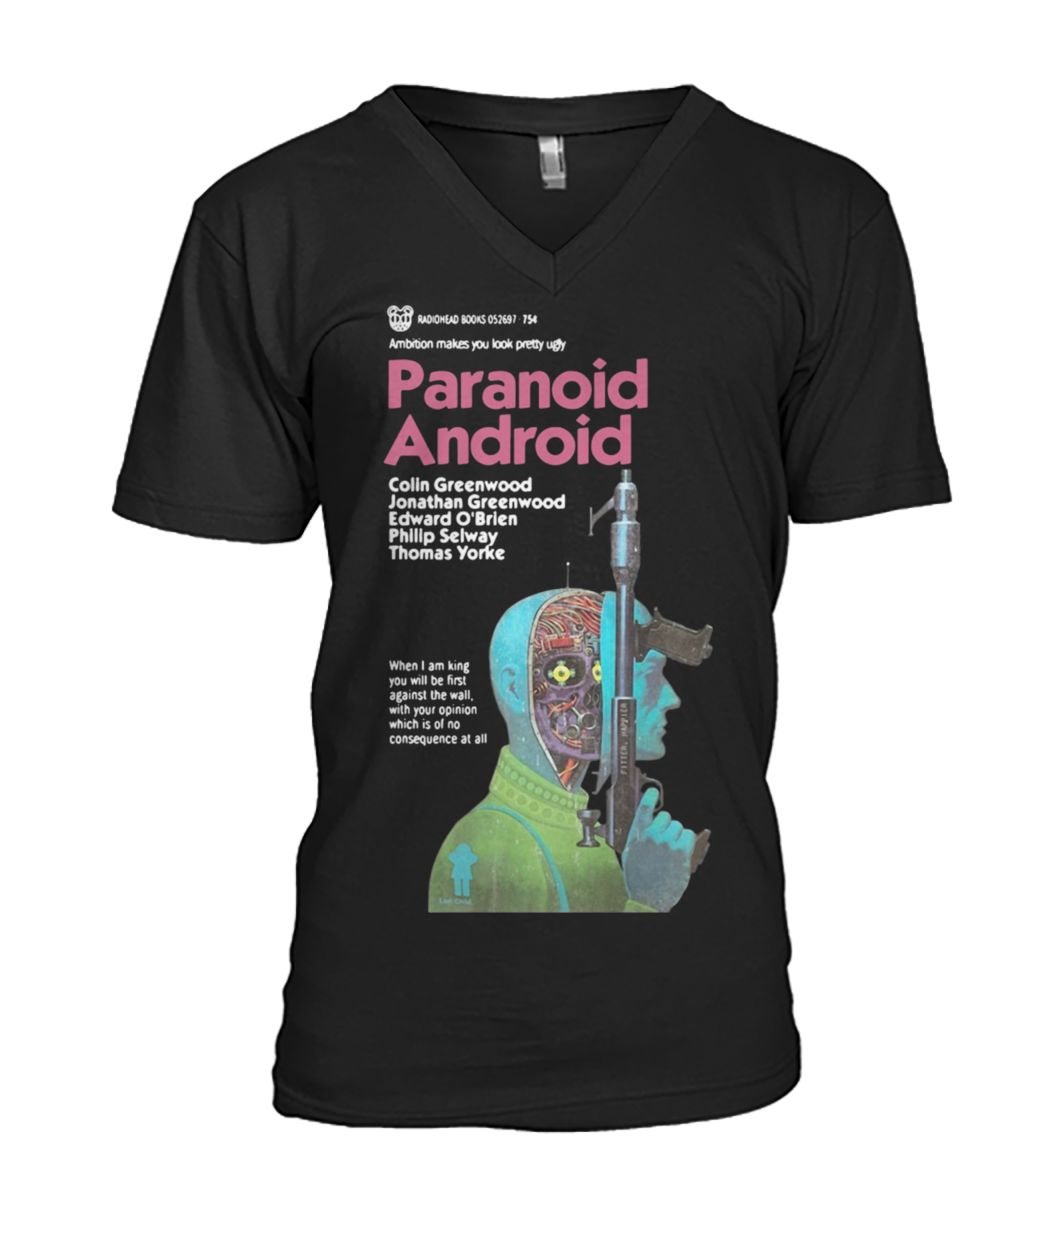 Paranoid android ambition makes you look pretty ugly mens v-neck